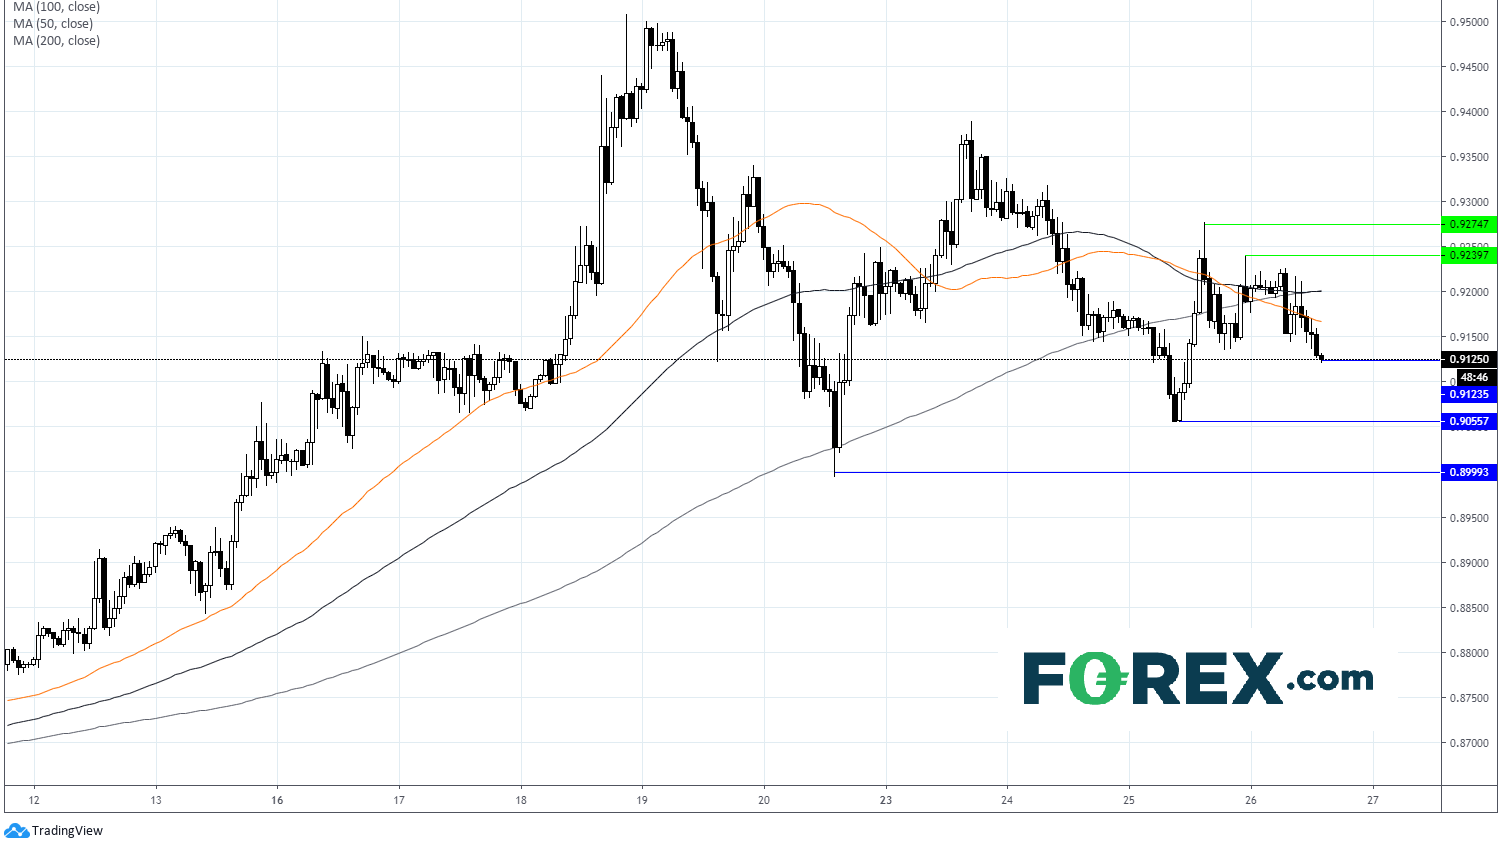 Chart analysis of the EURO(EUR) to Pound Sterling(GBP). Published in March 2020 by FOREX.com